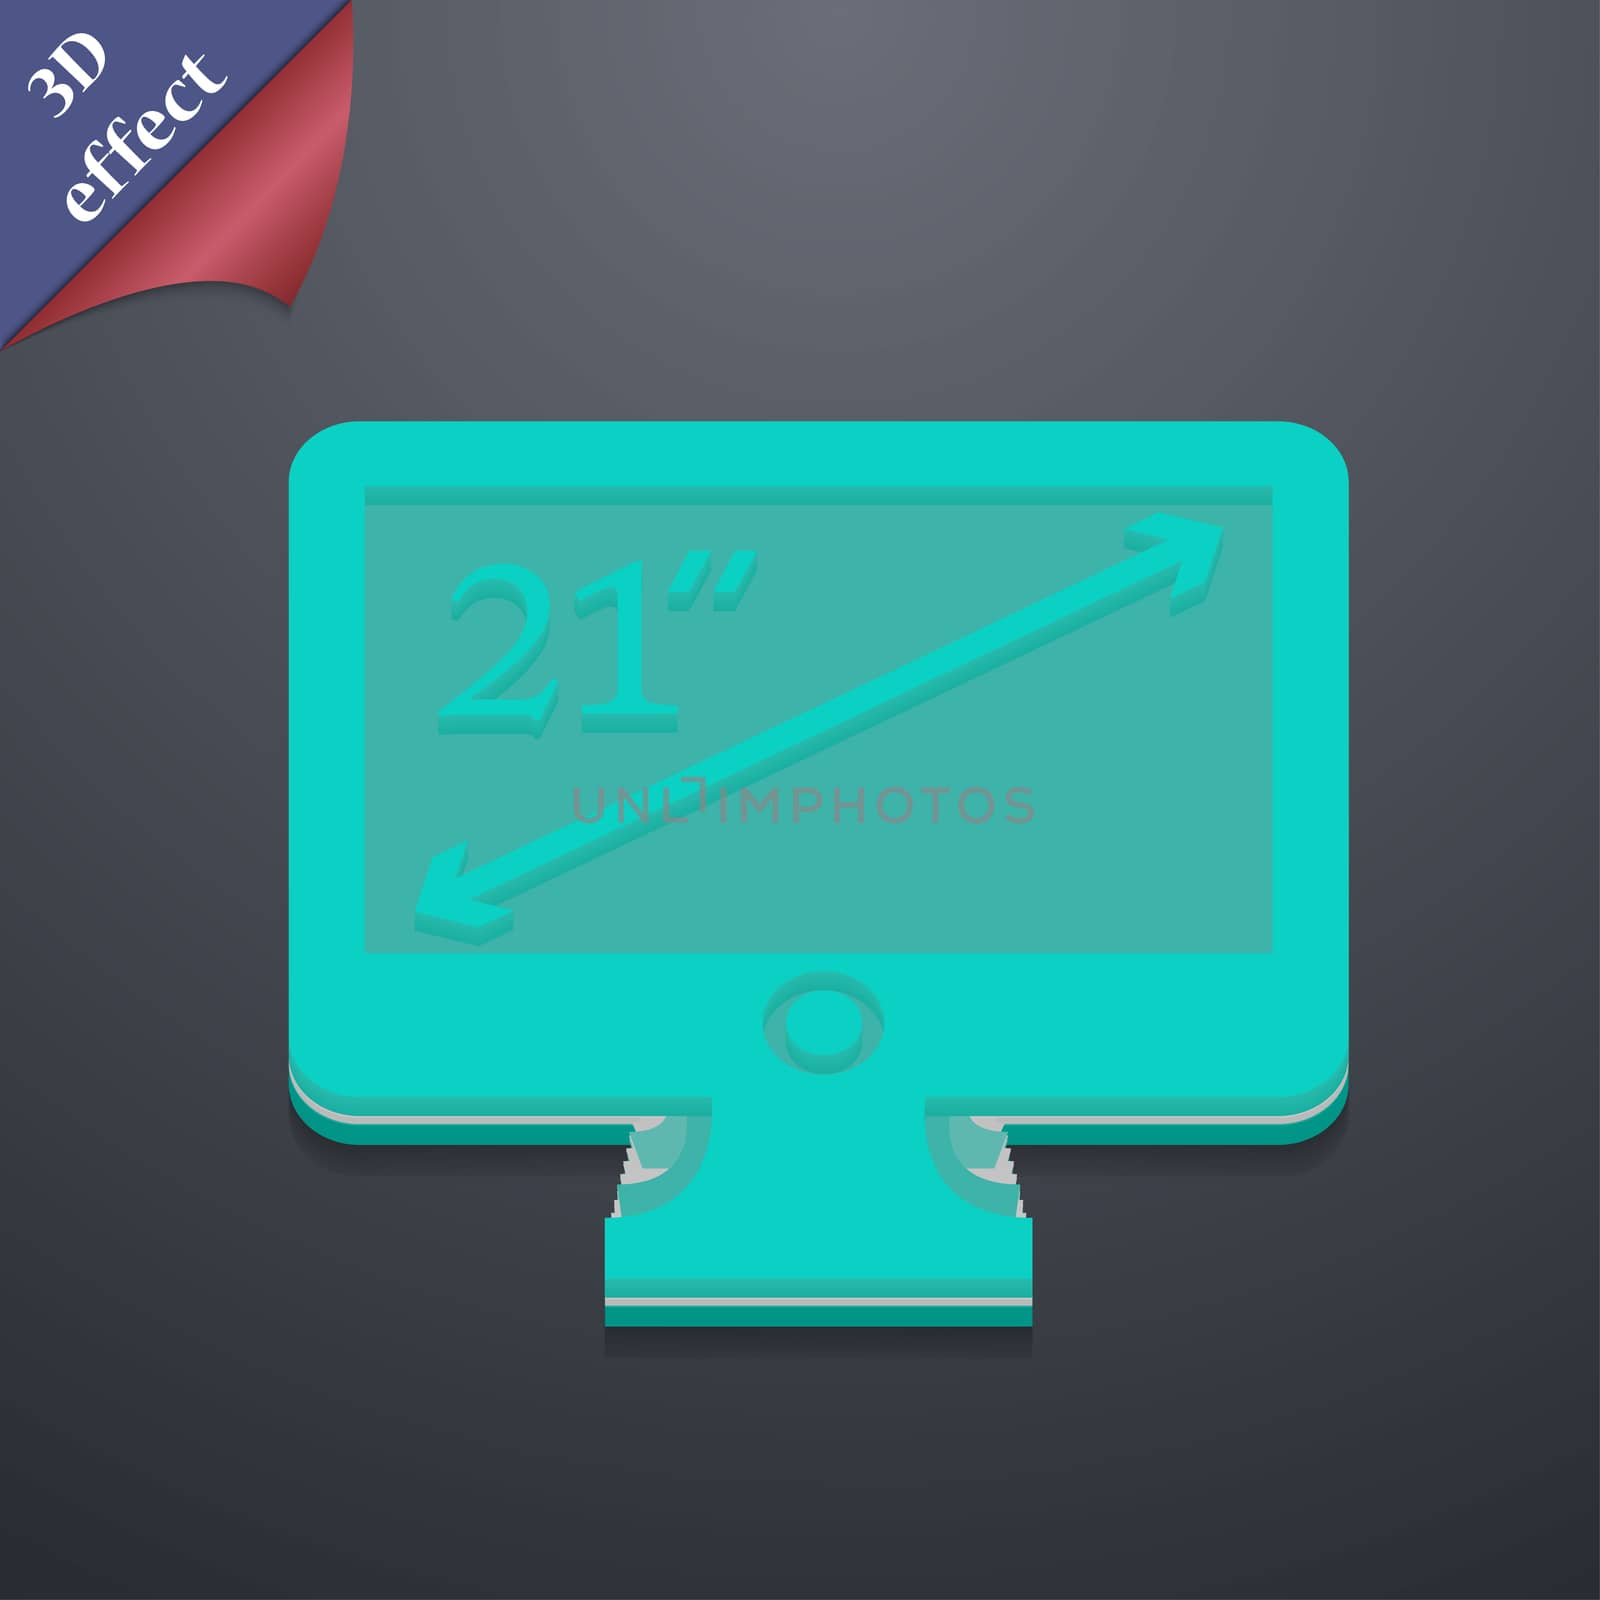 diagonal of the monitor 21 inches icon symbol. 3D style. Trendy, modern design with space for your text illustration. Rastrized copy